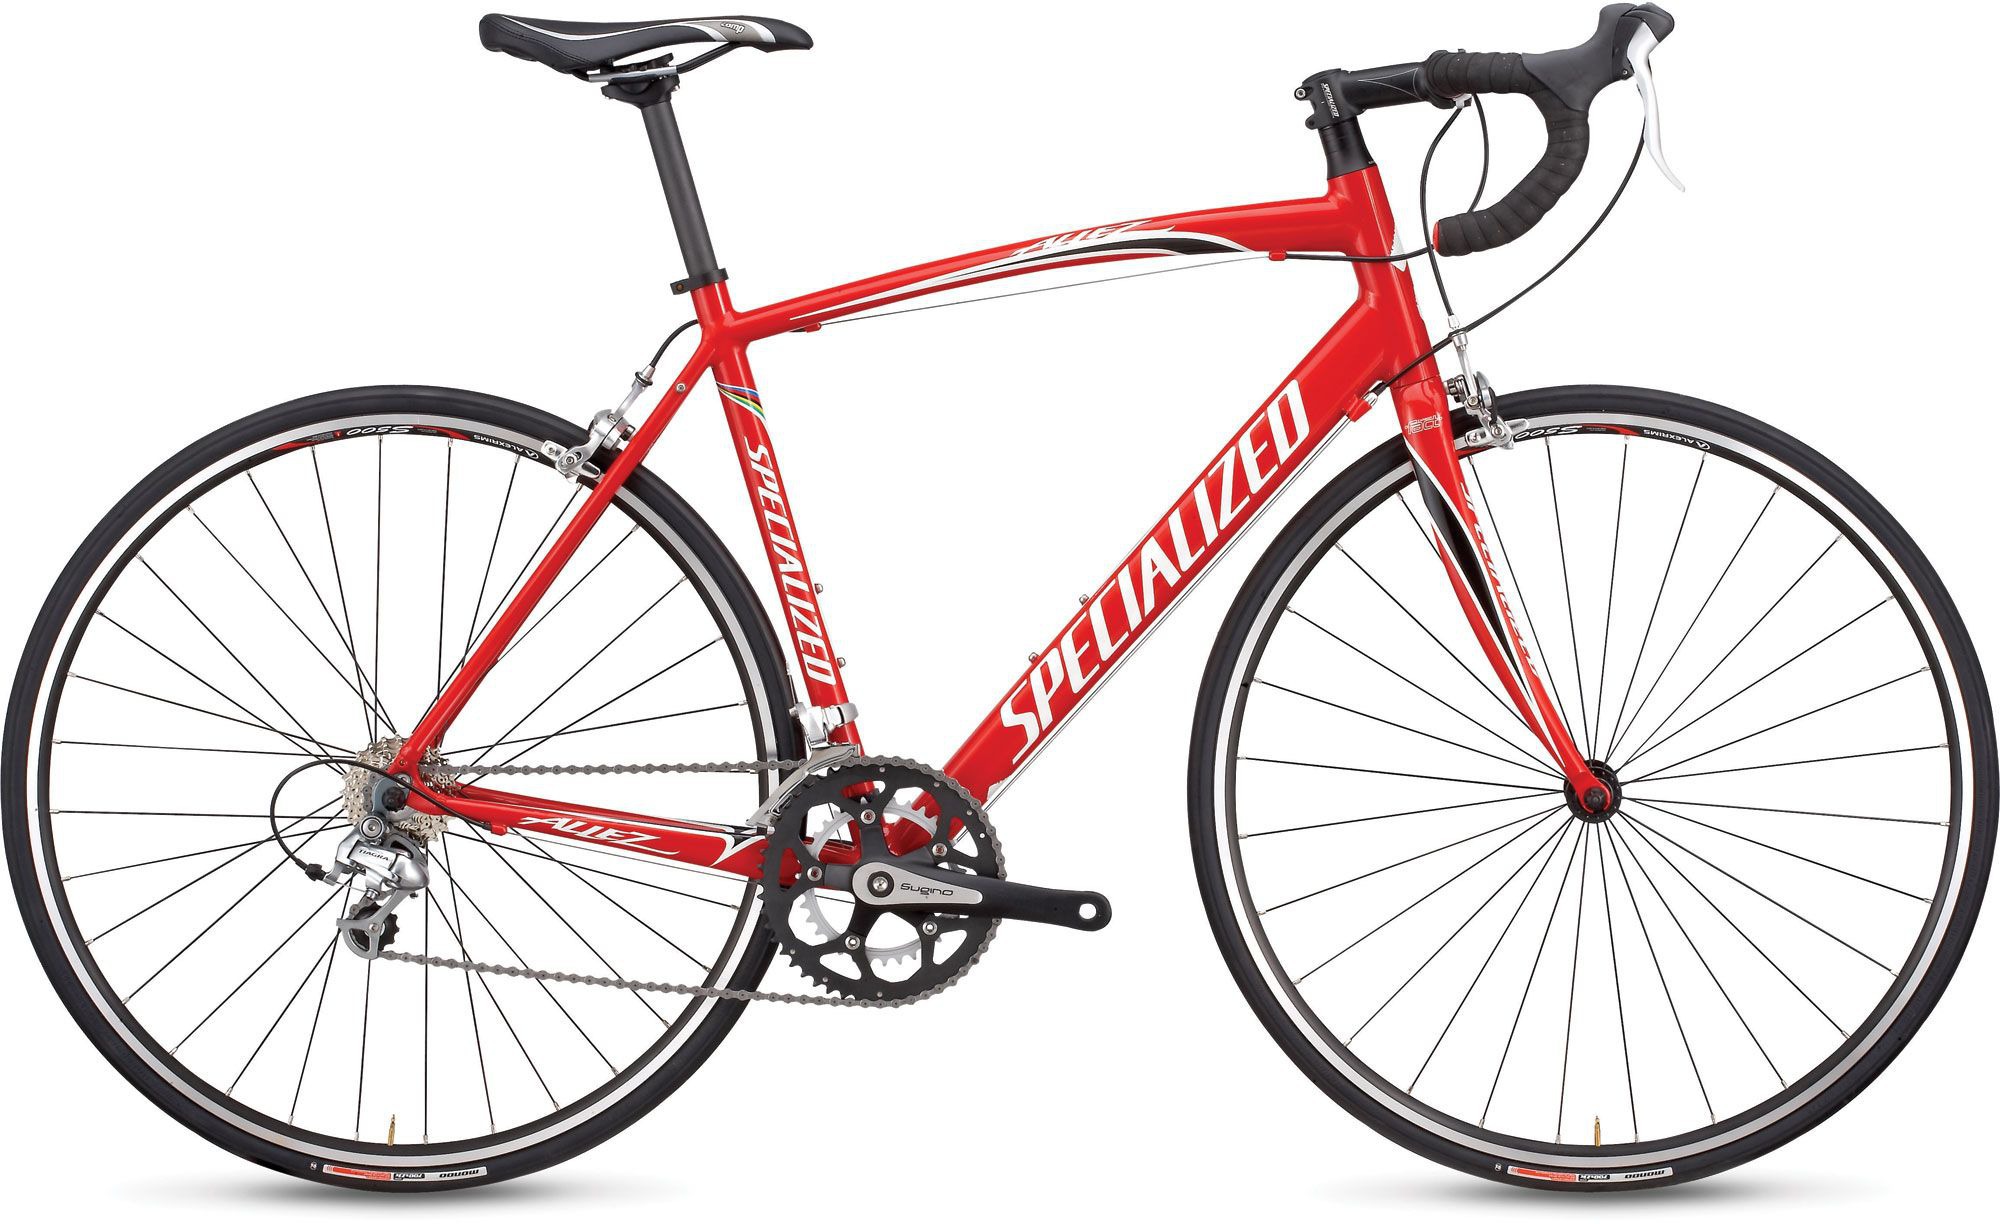 2009 Specialized Allez Compact 